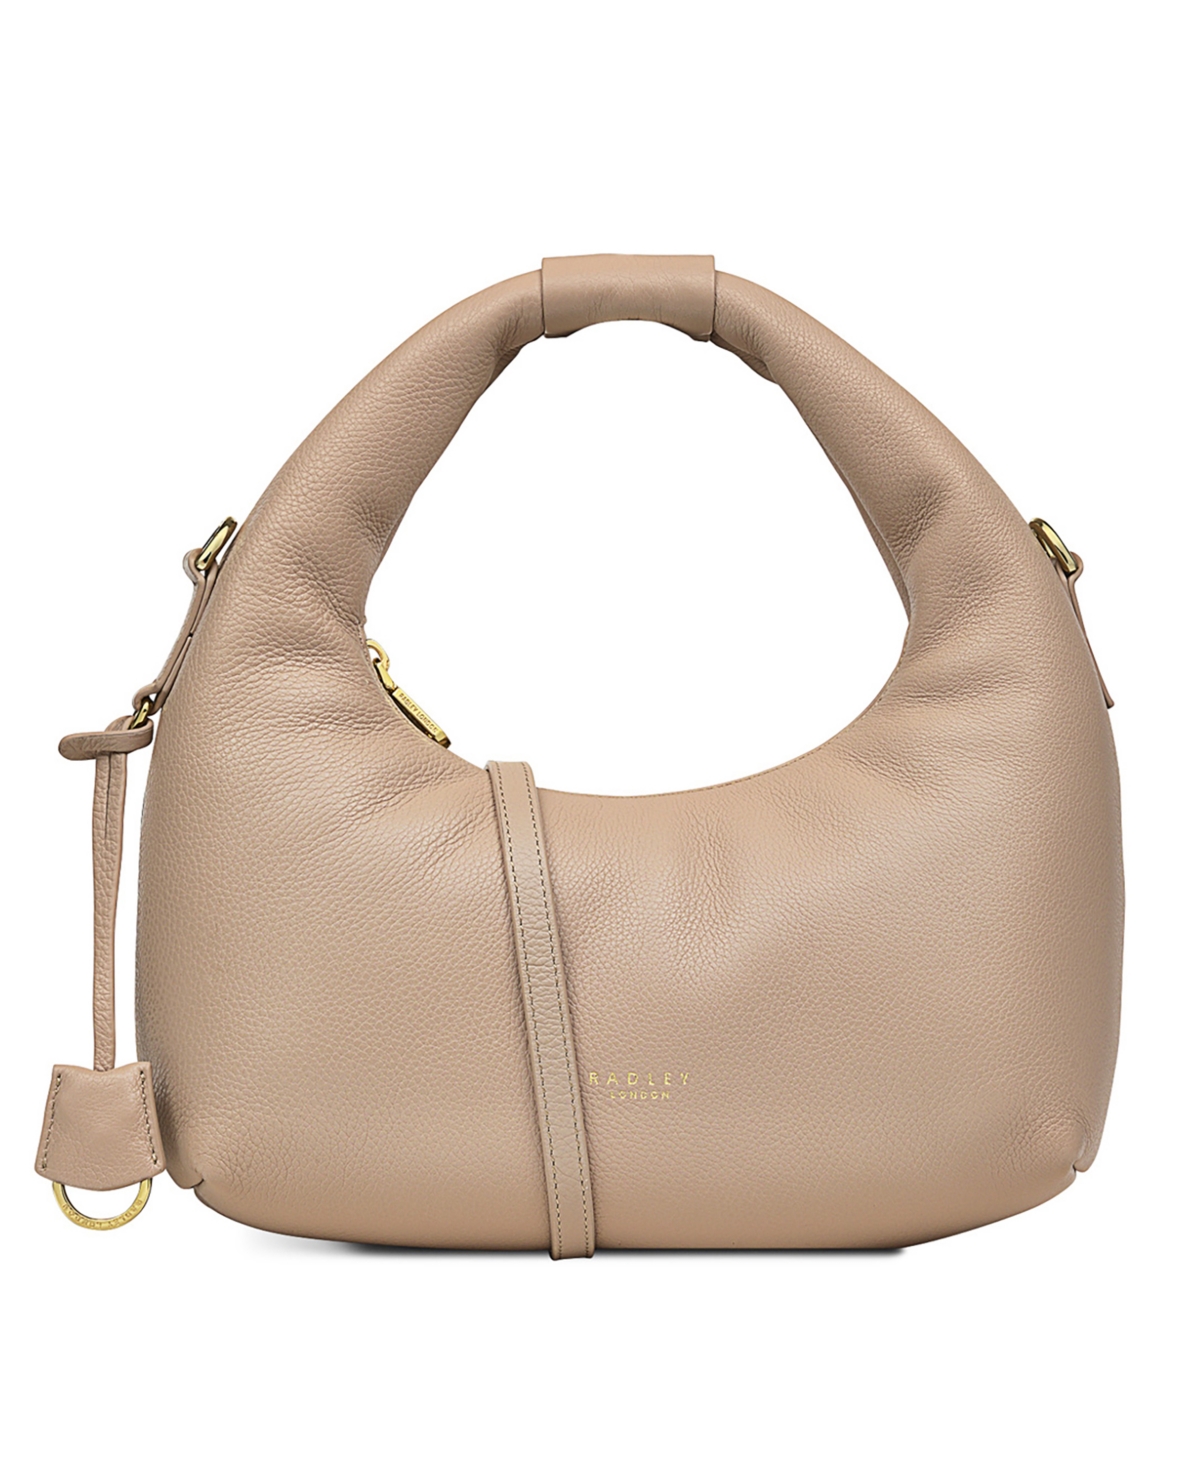 Charles Street Small Leather Zip Top Grab Bag - Silt